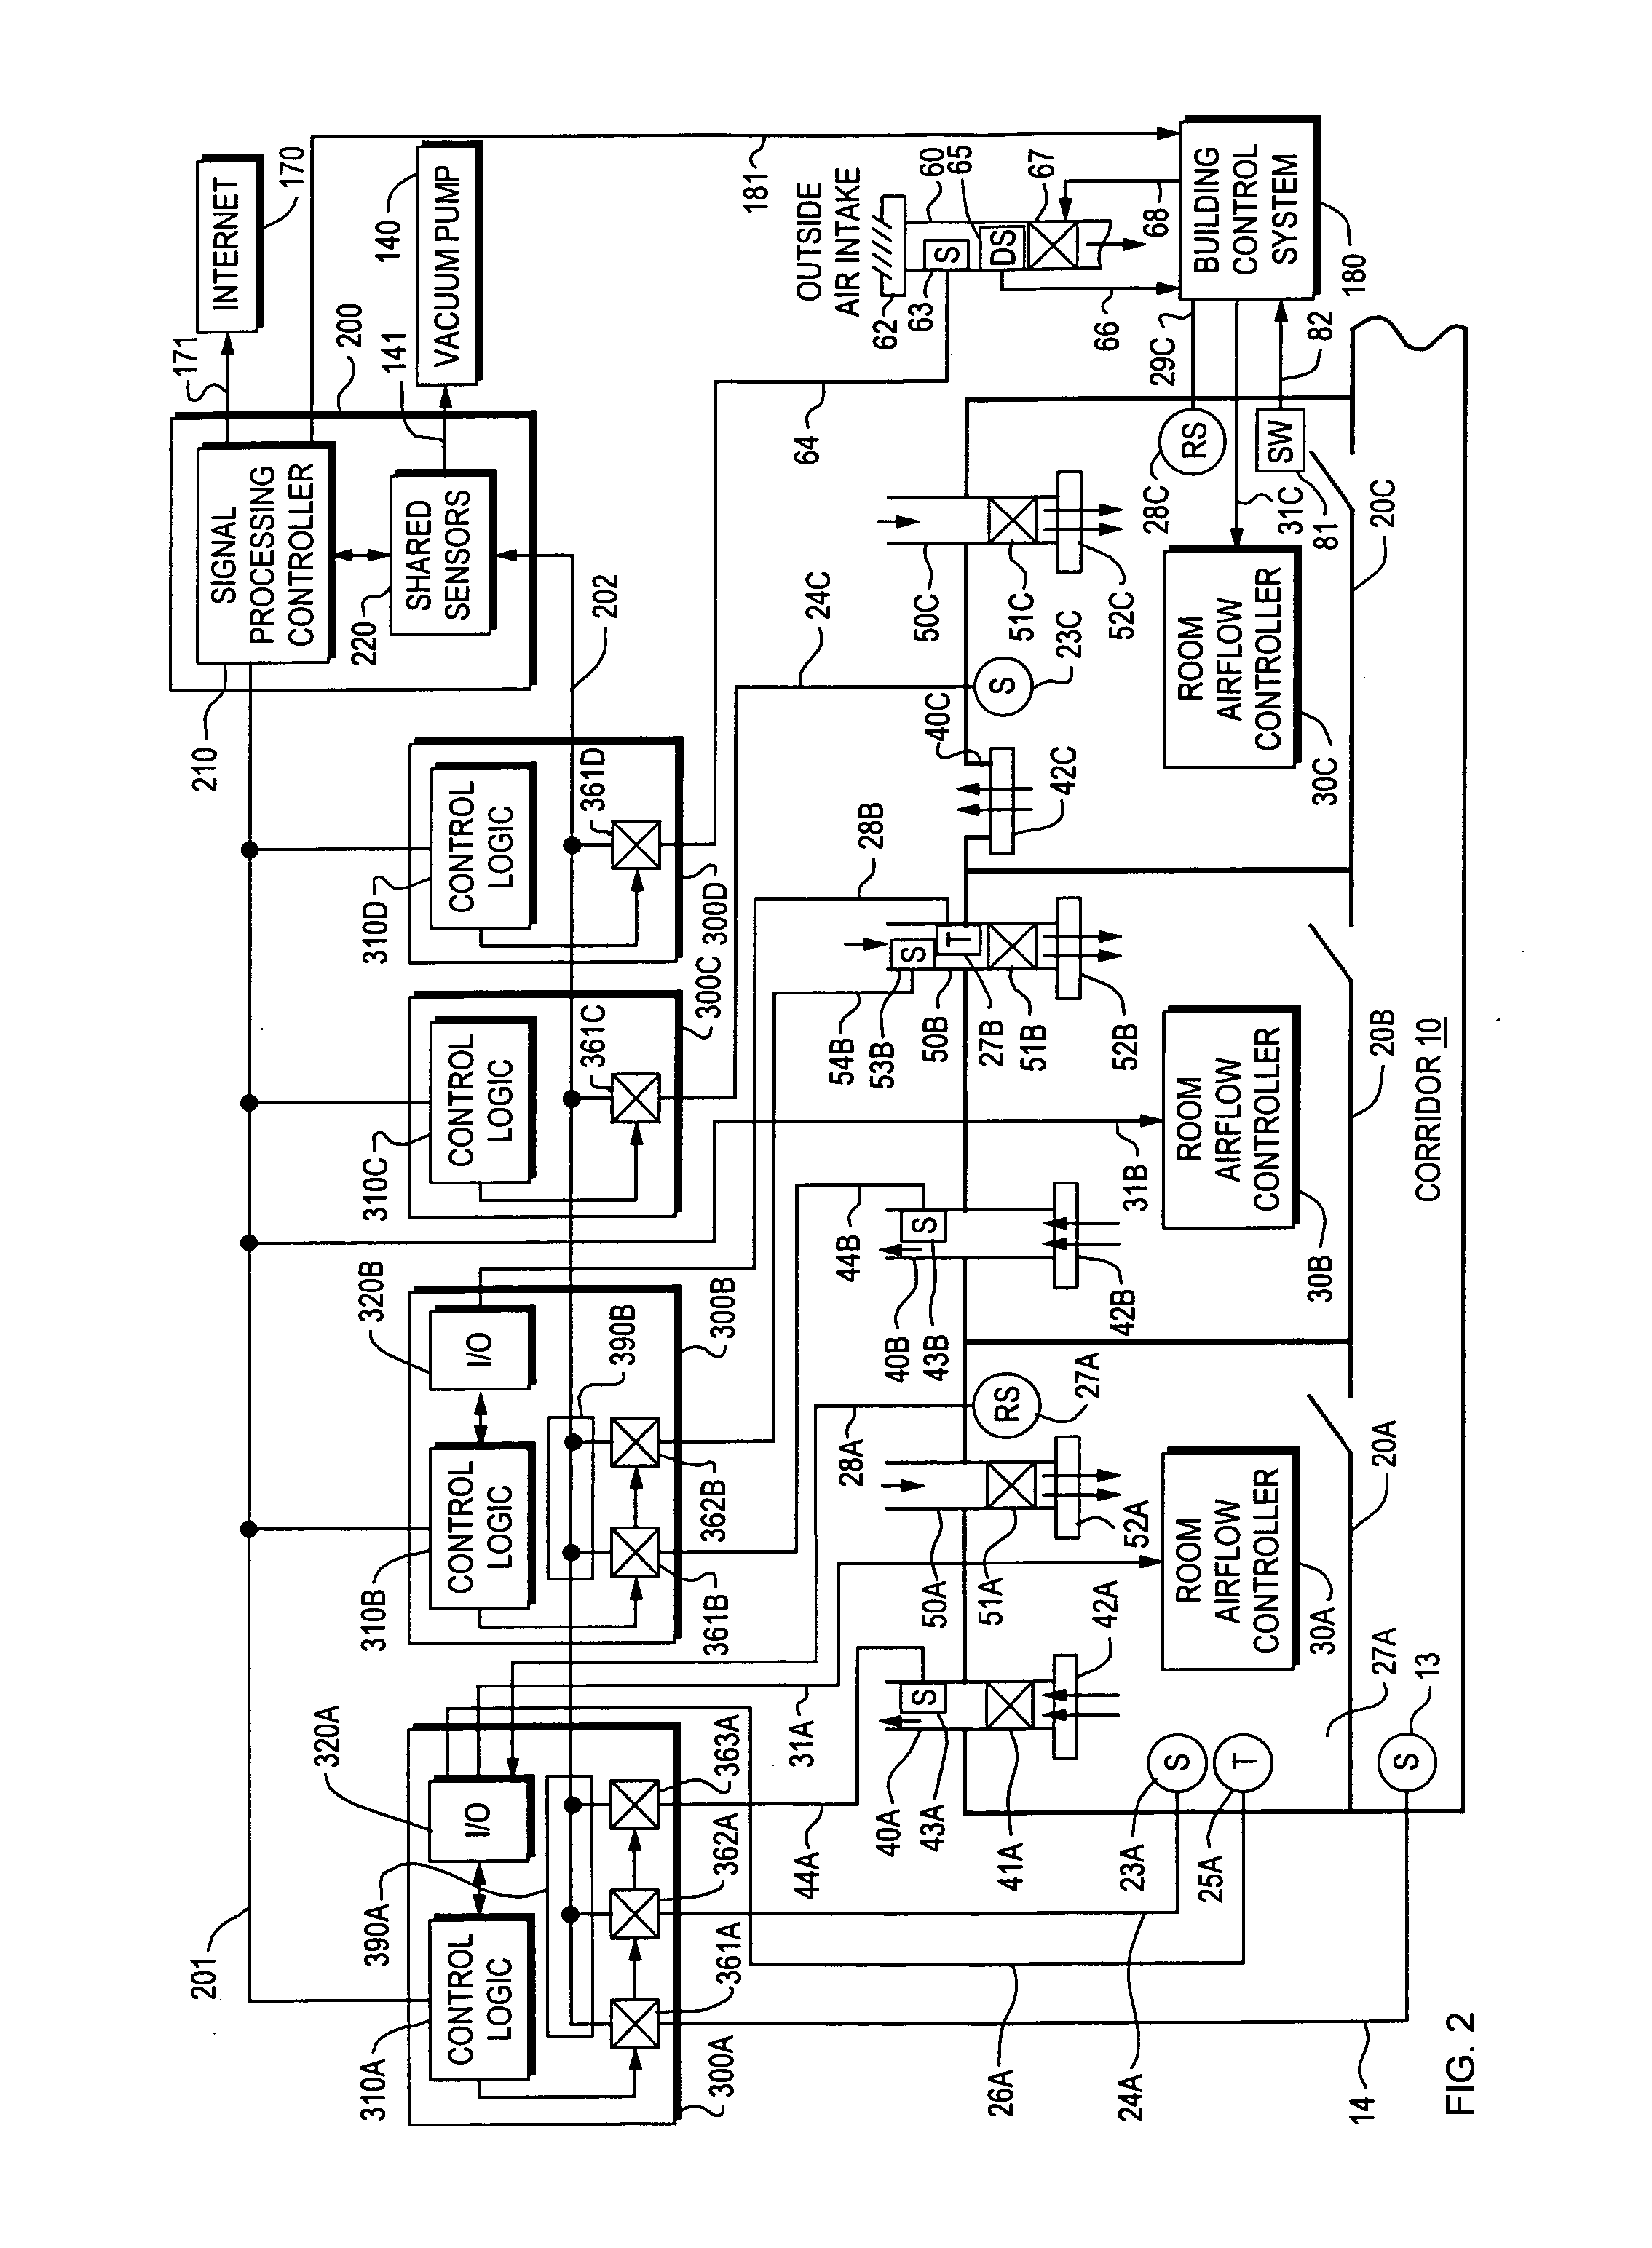 Multipoint air sampling system having common sensors to provide blended air quality parameter information for monitoring and building control